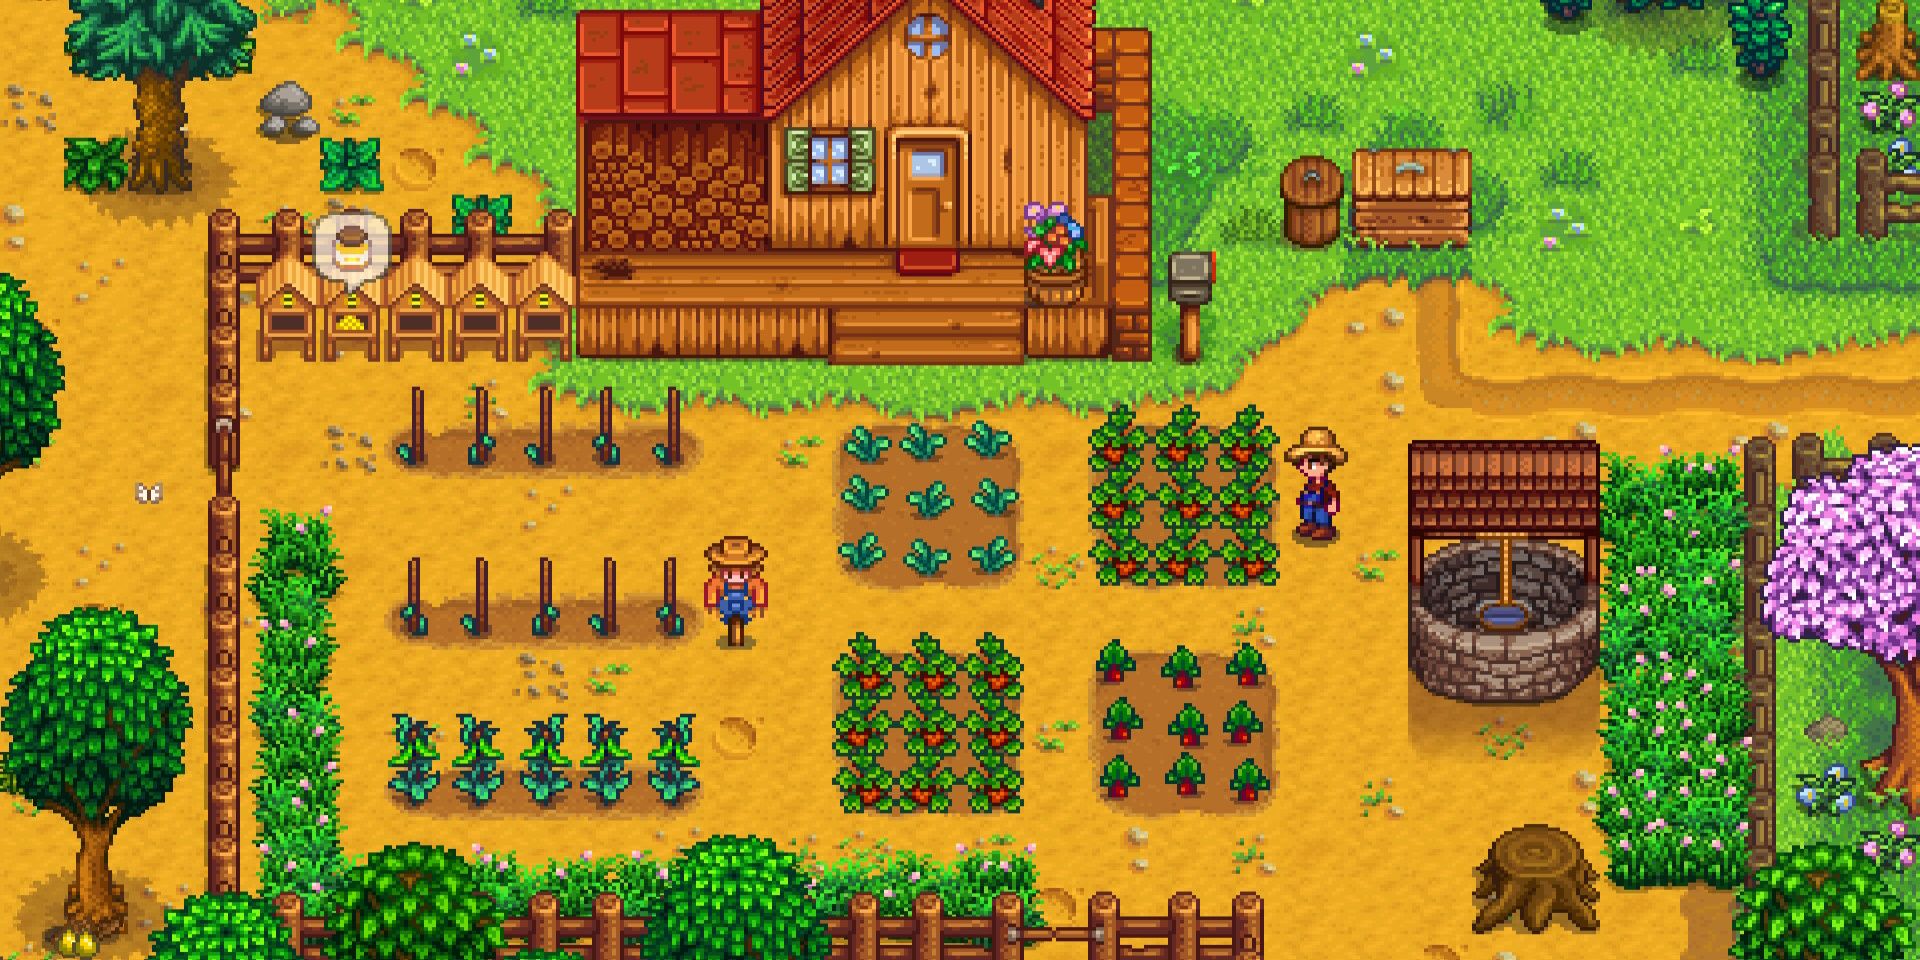 Characters watching over crops and farms in Stardew Valley